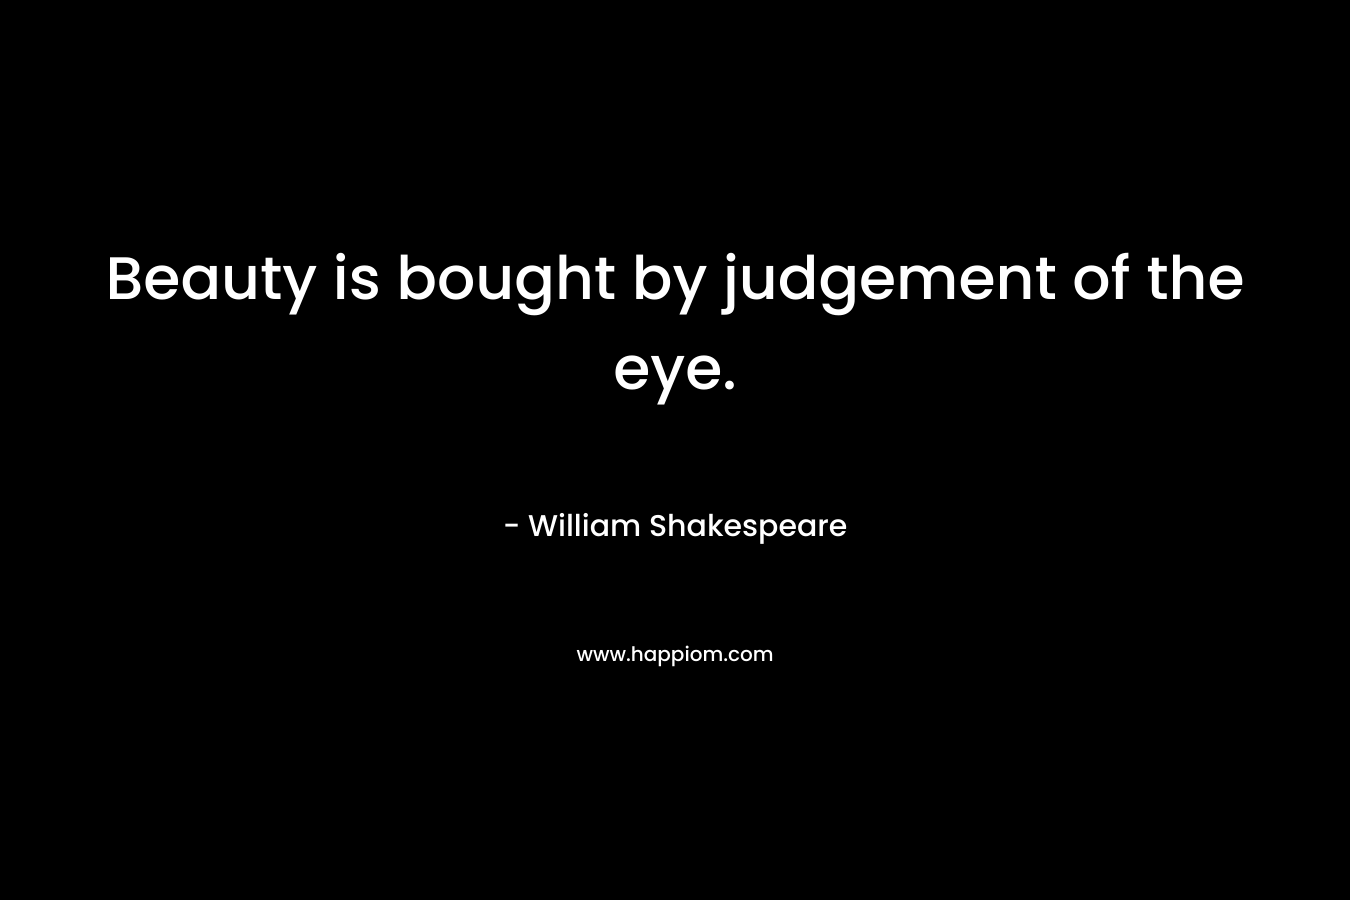 Beauty is bought by judgement of the eye. – William Shakespeare